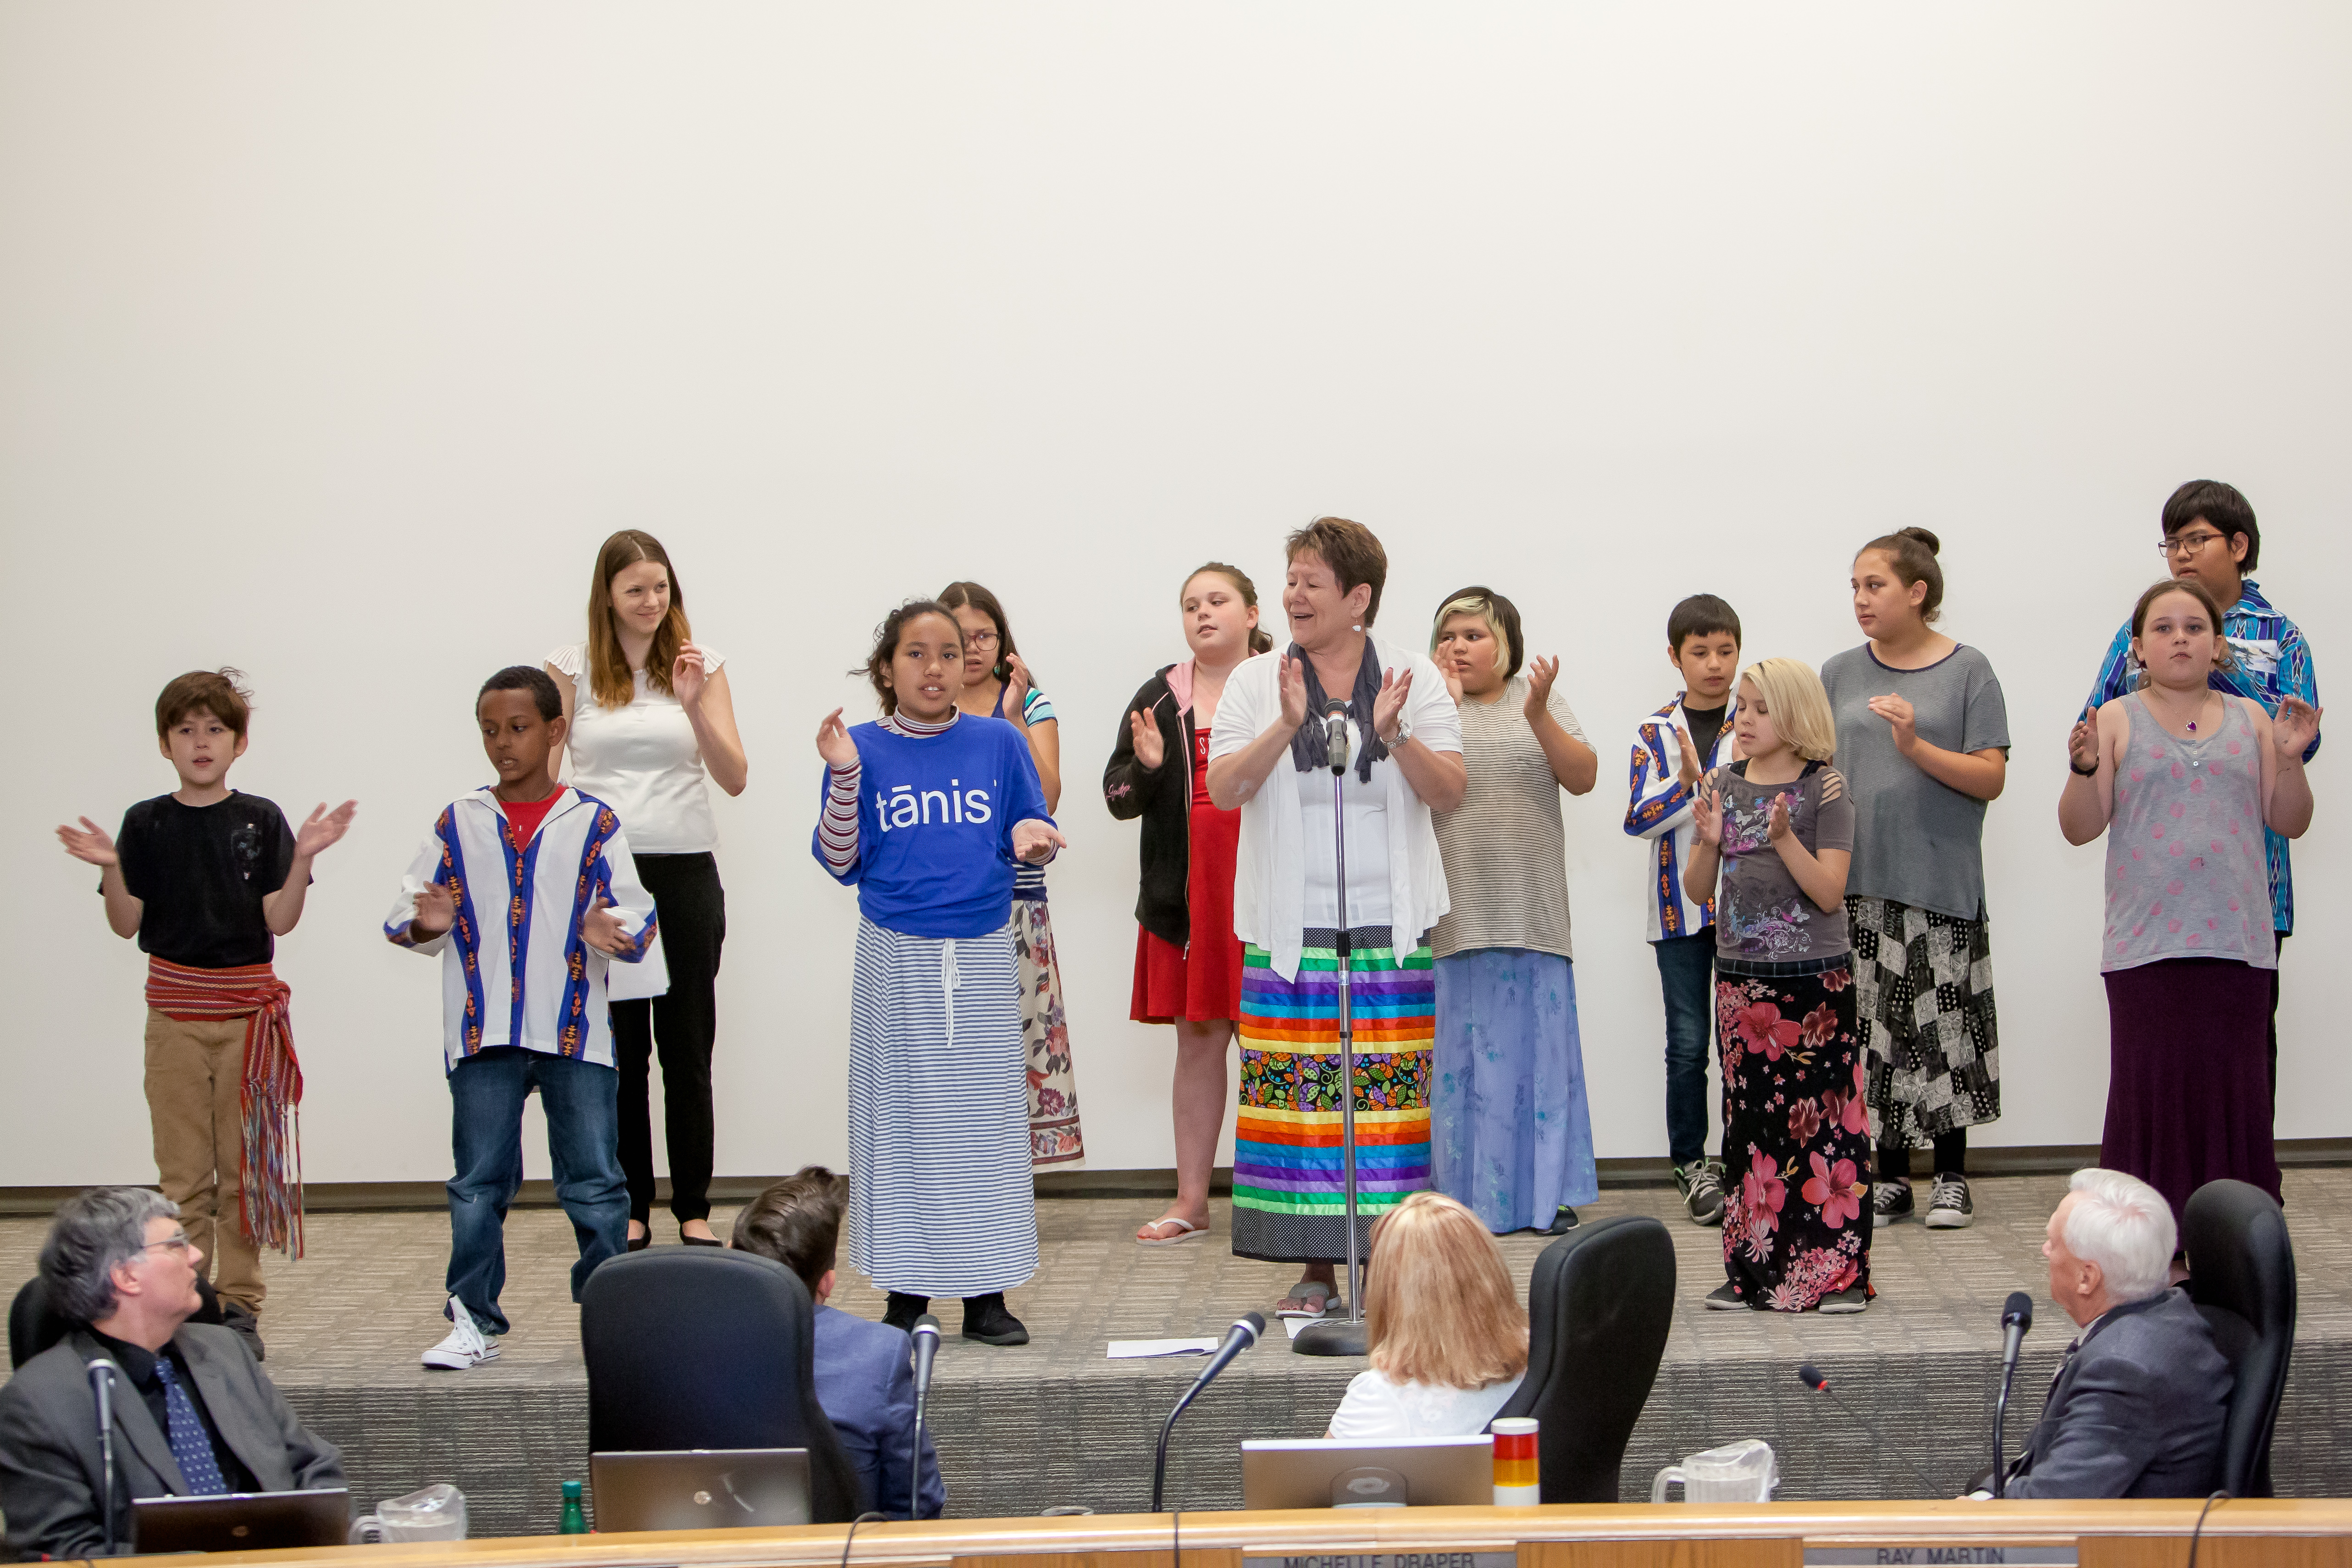 The Cree choir from Prince Charles School opened the Board meeting by singing the national anthem in Cree and reciting a prayer in Cree to mark National Aboriginal Day.